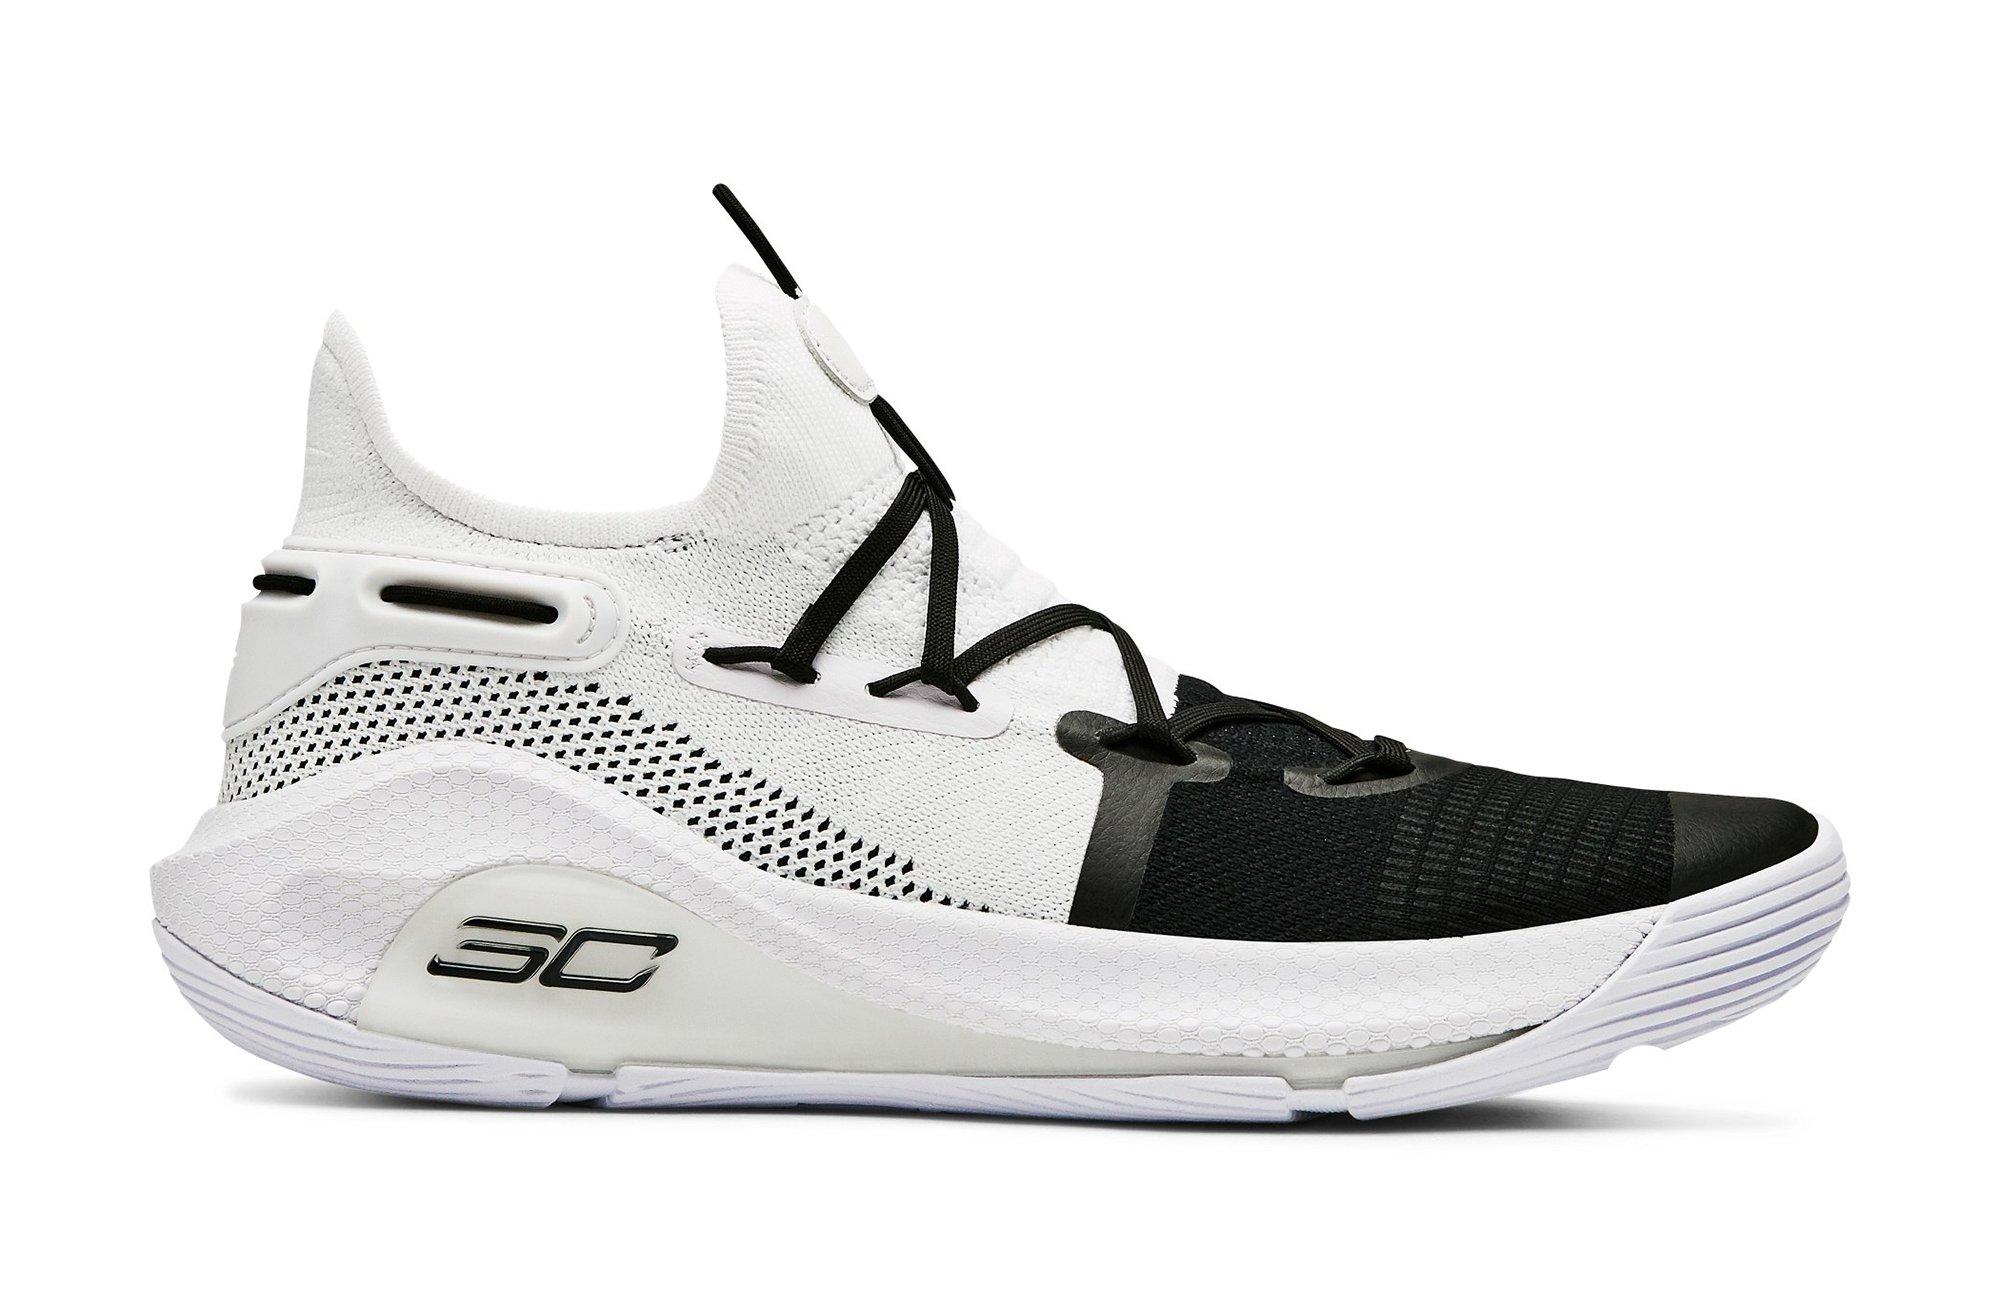 Sneakers Release – Under Armour Curry 6 “White/Black”  Men’s and Kids’ Basketball Shoe